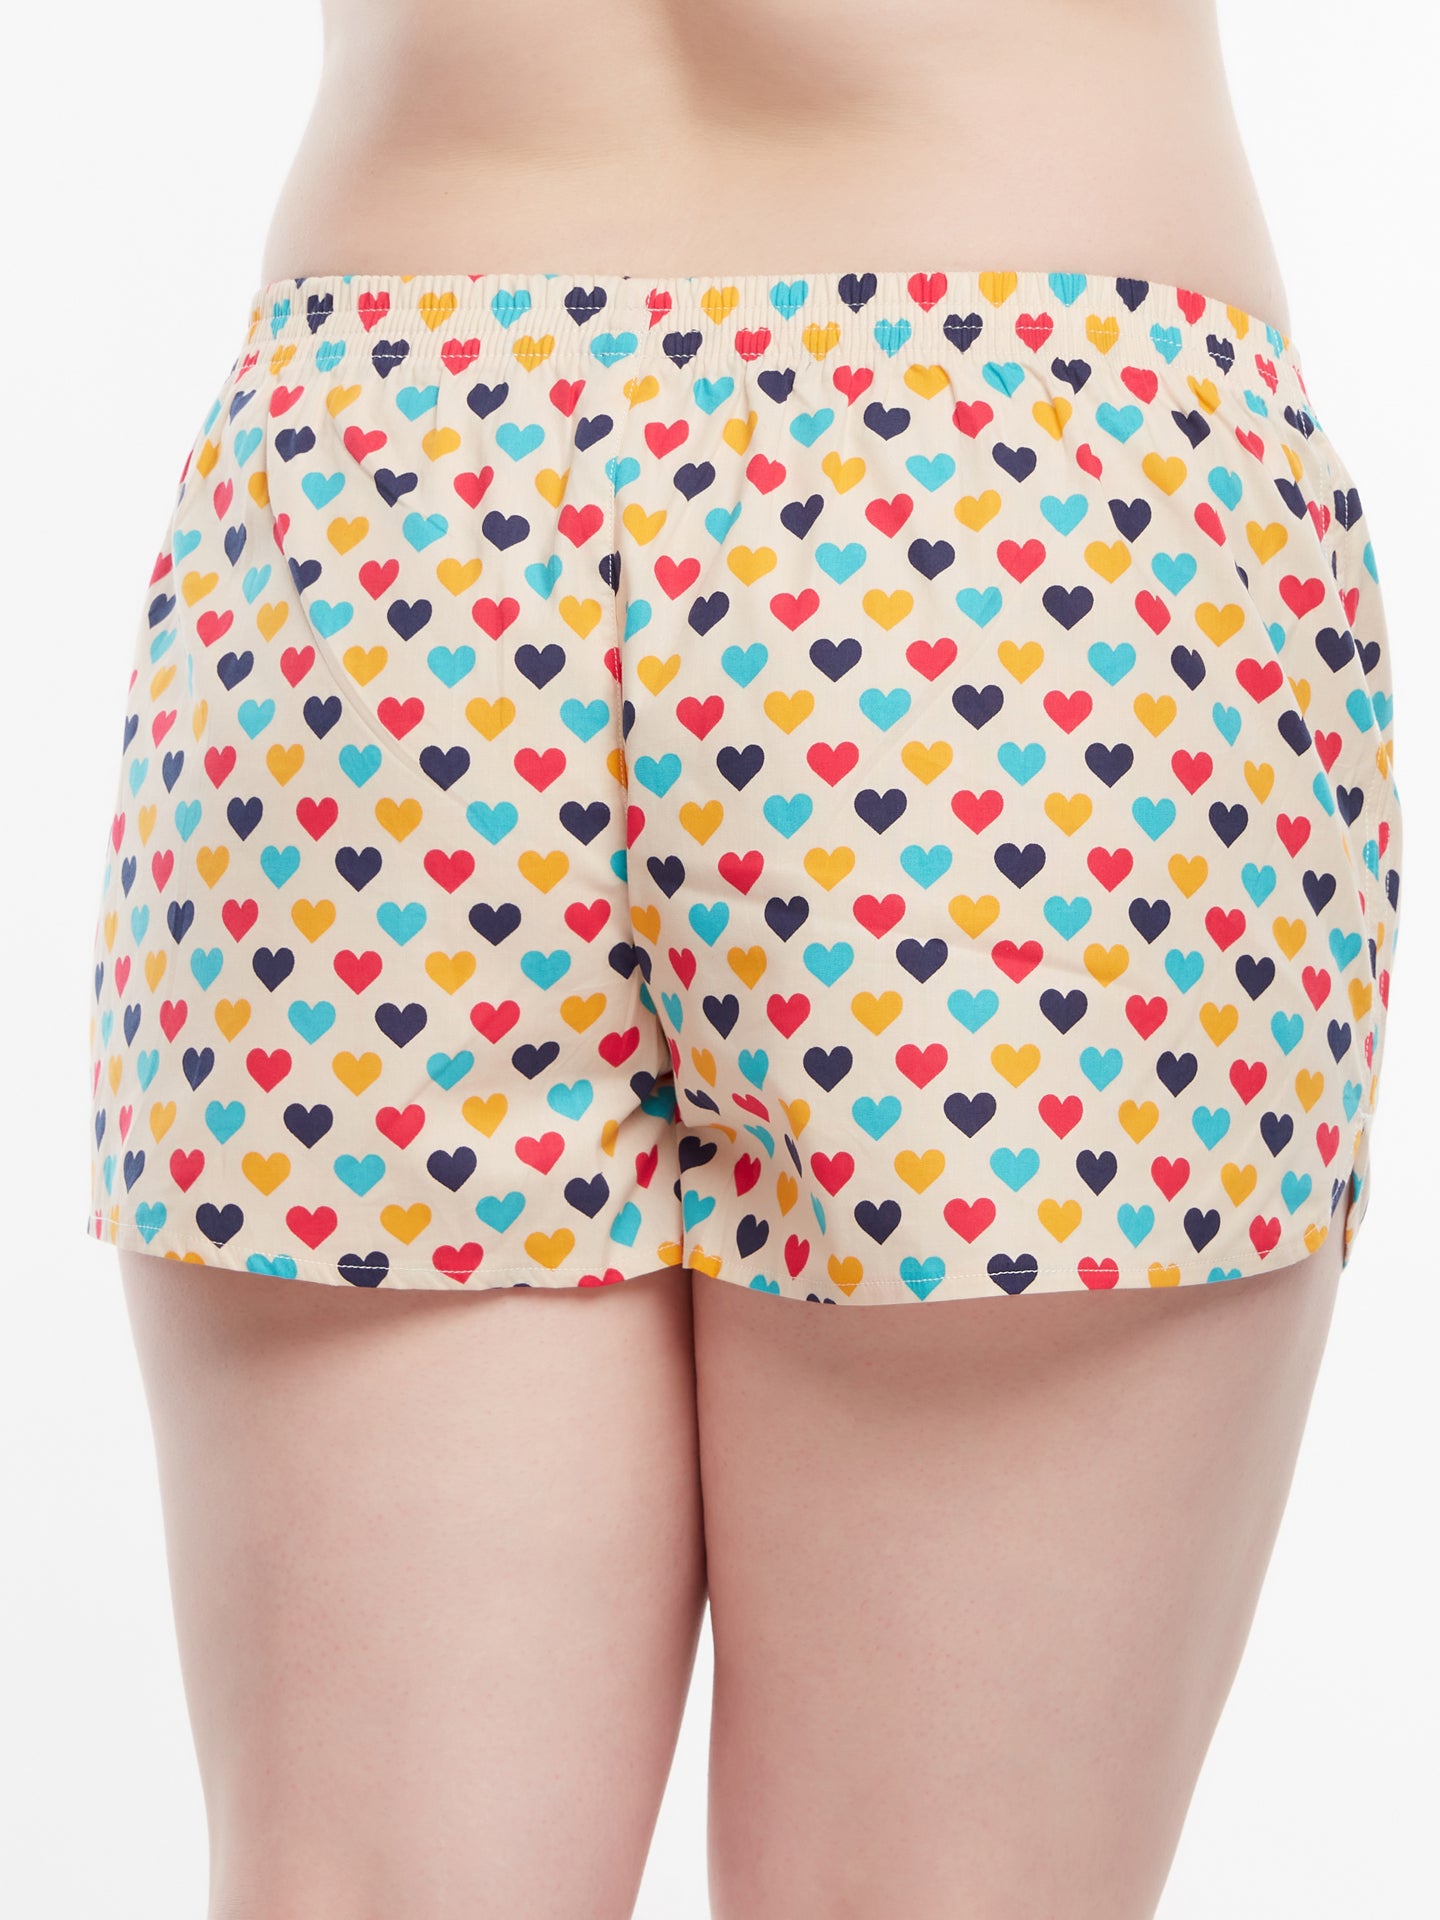 Women's Boxer Shorts Colorful Hearts